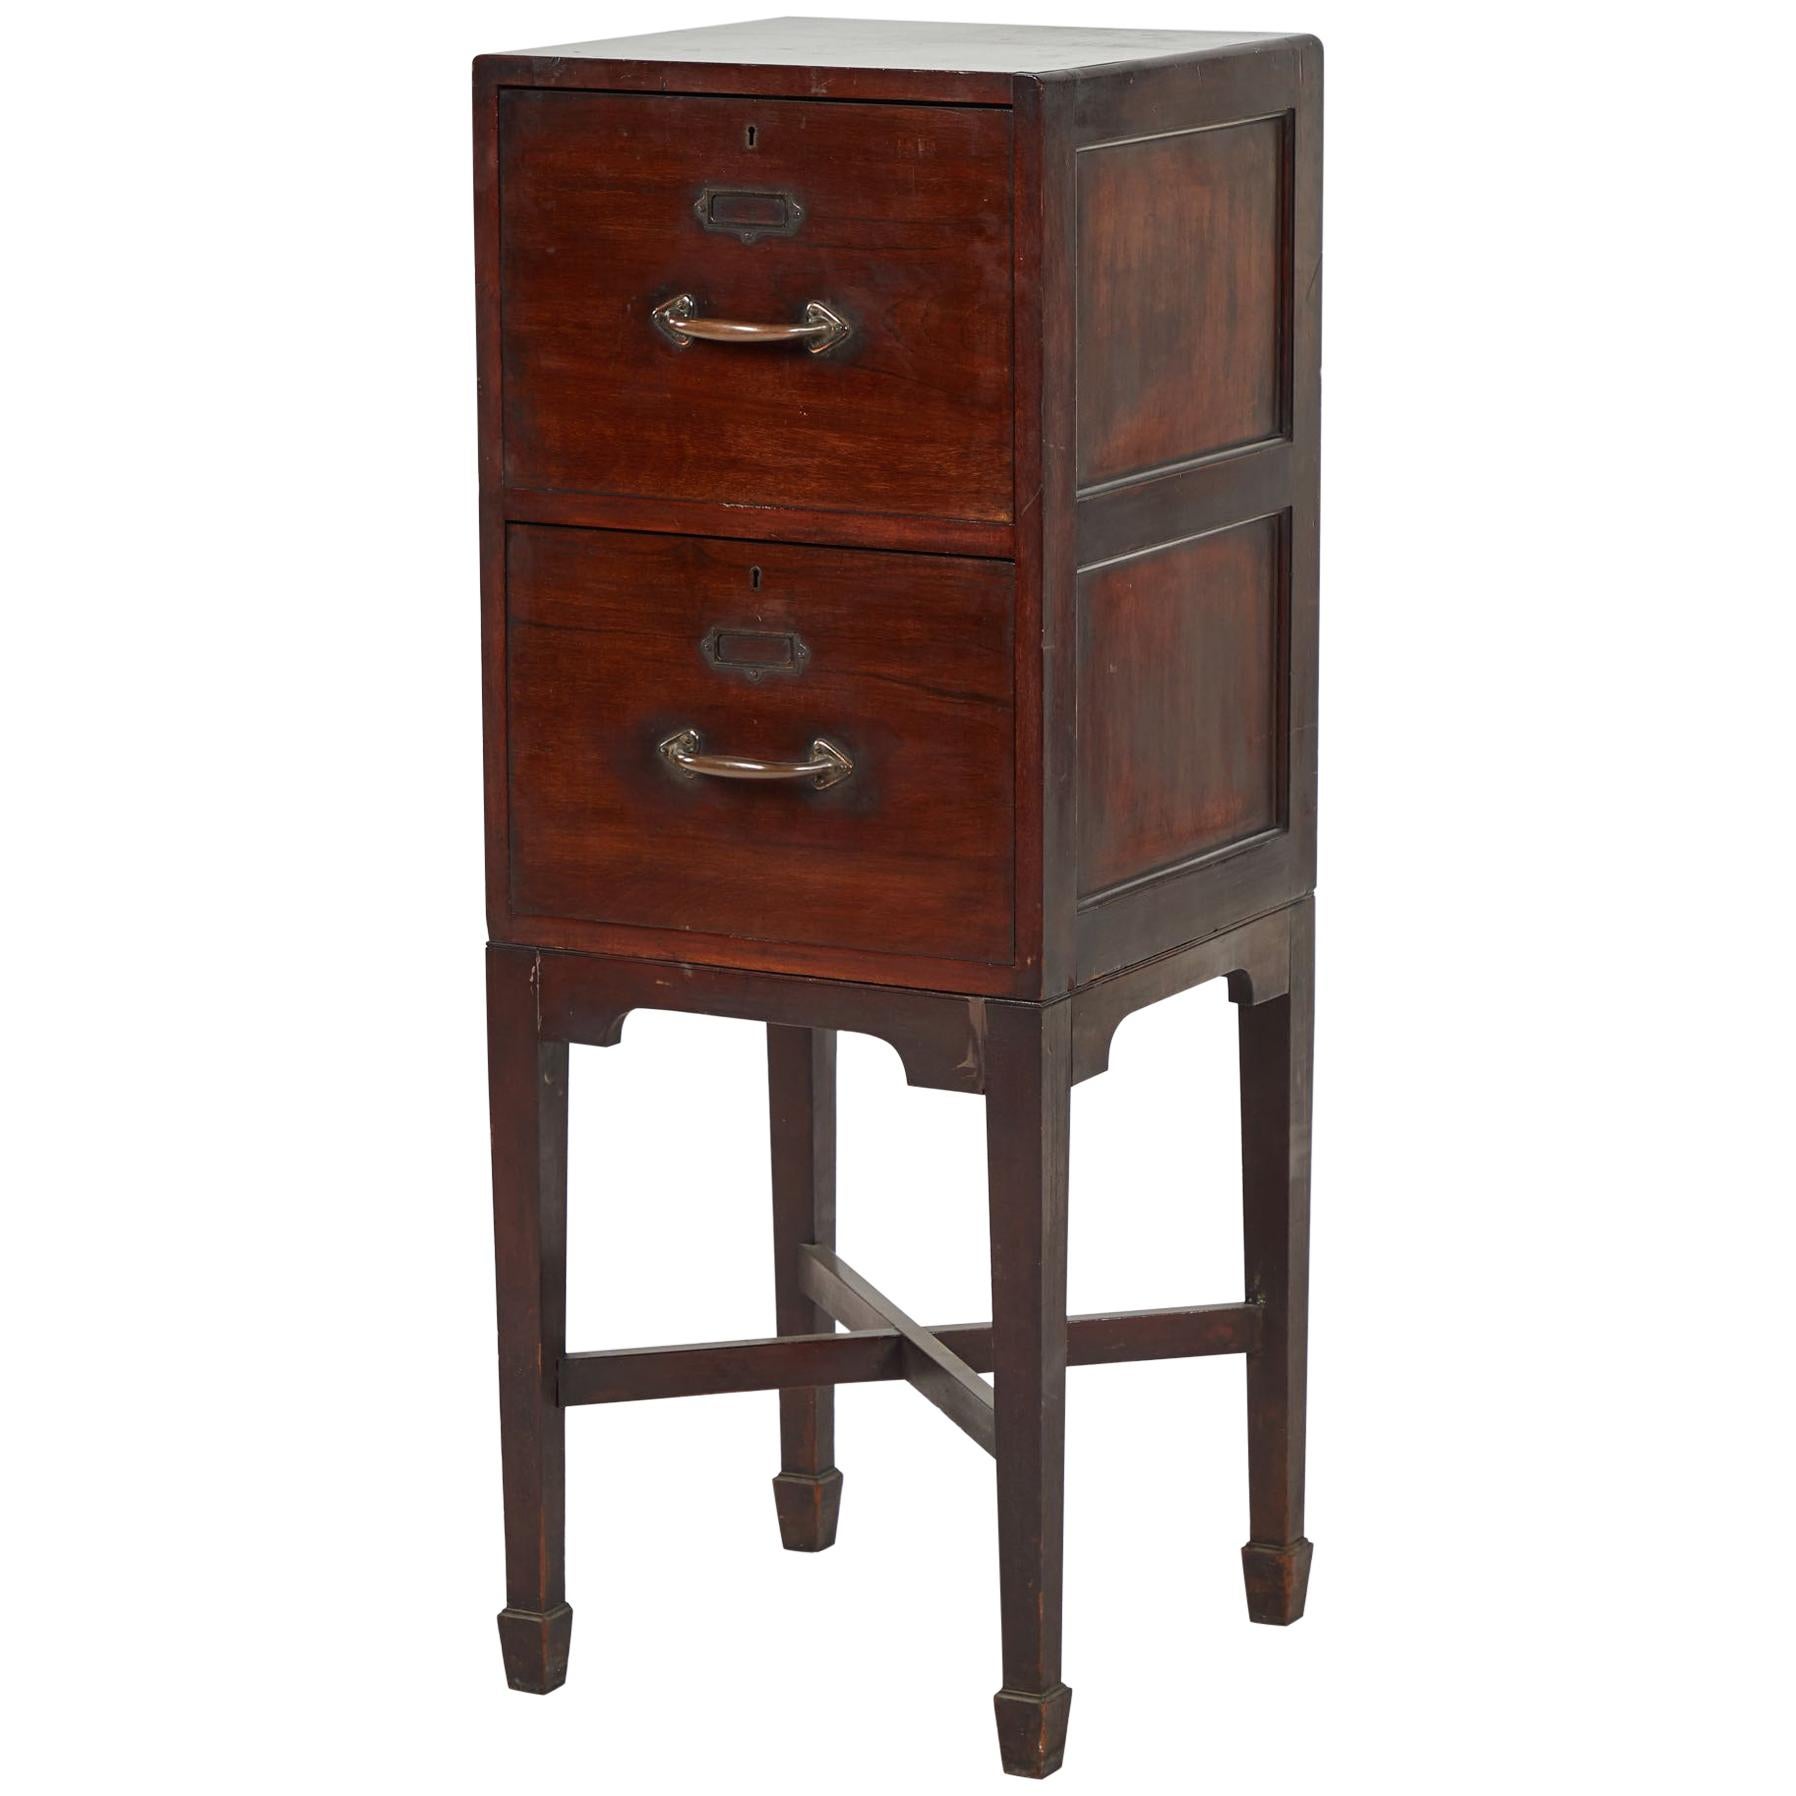 Filing Cabinet with Two Drawers in Mahogany